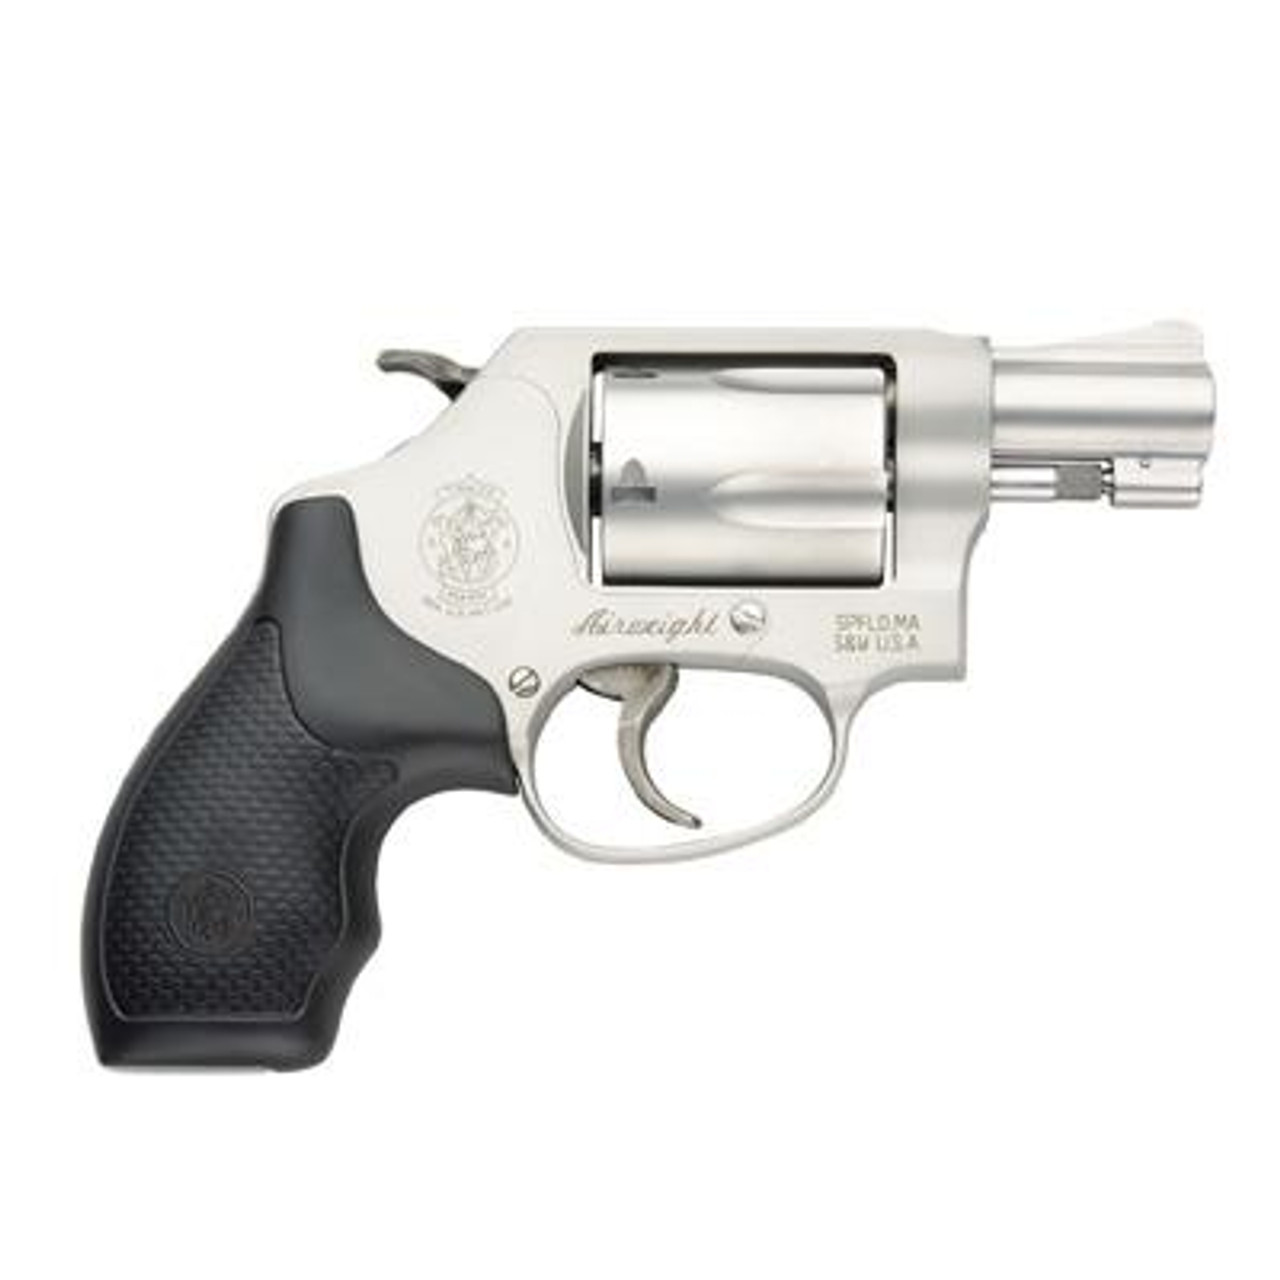 Smith & Wesson 637 38 Special - 5 Shot - Dance's Sporting Goods